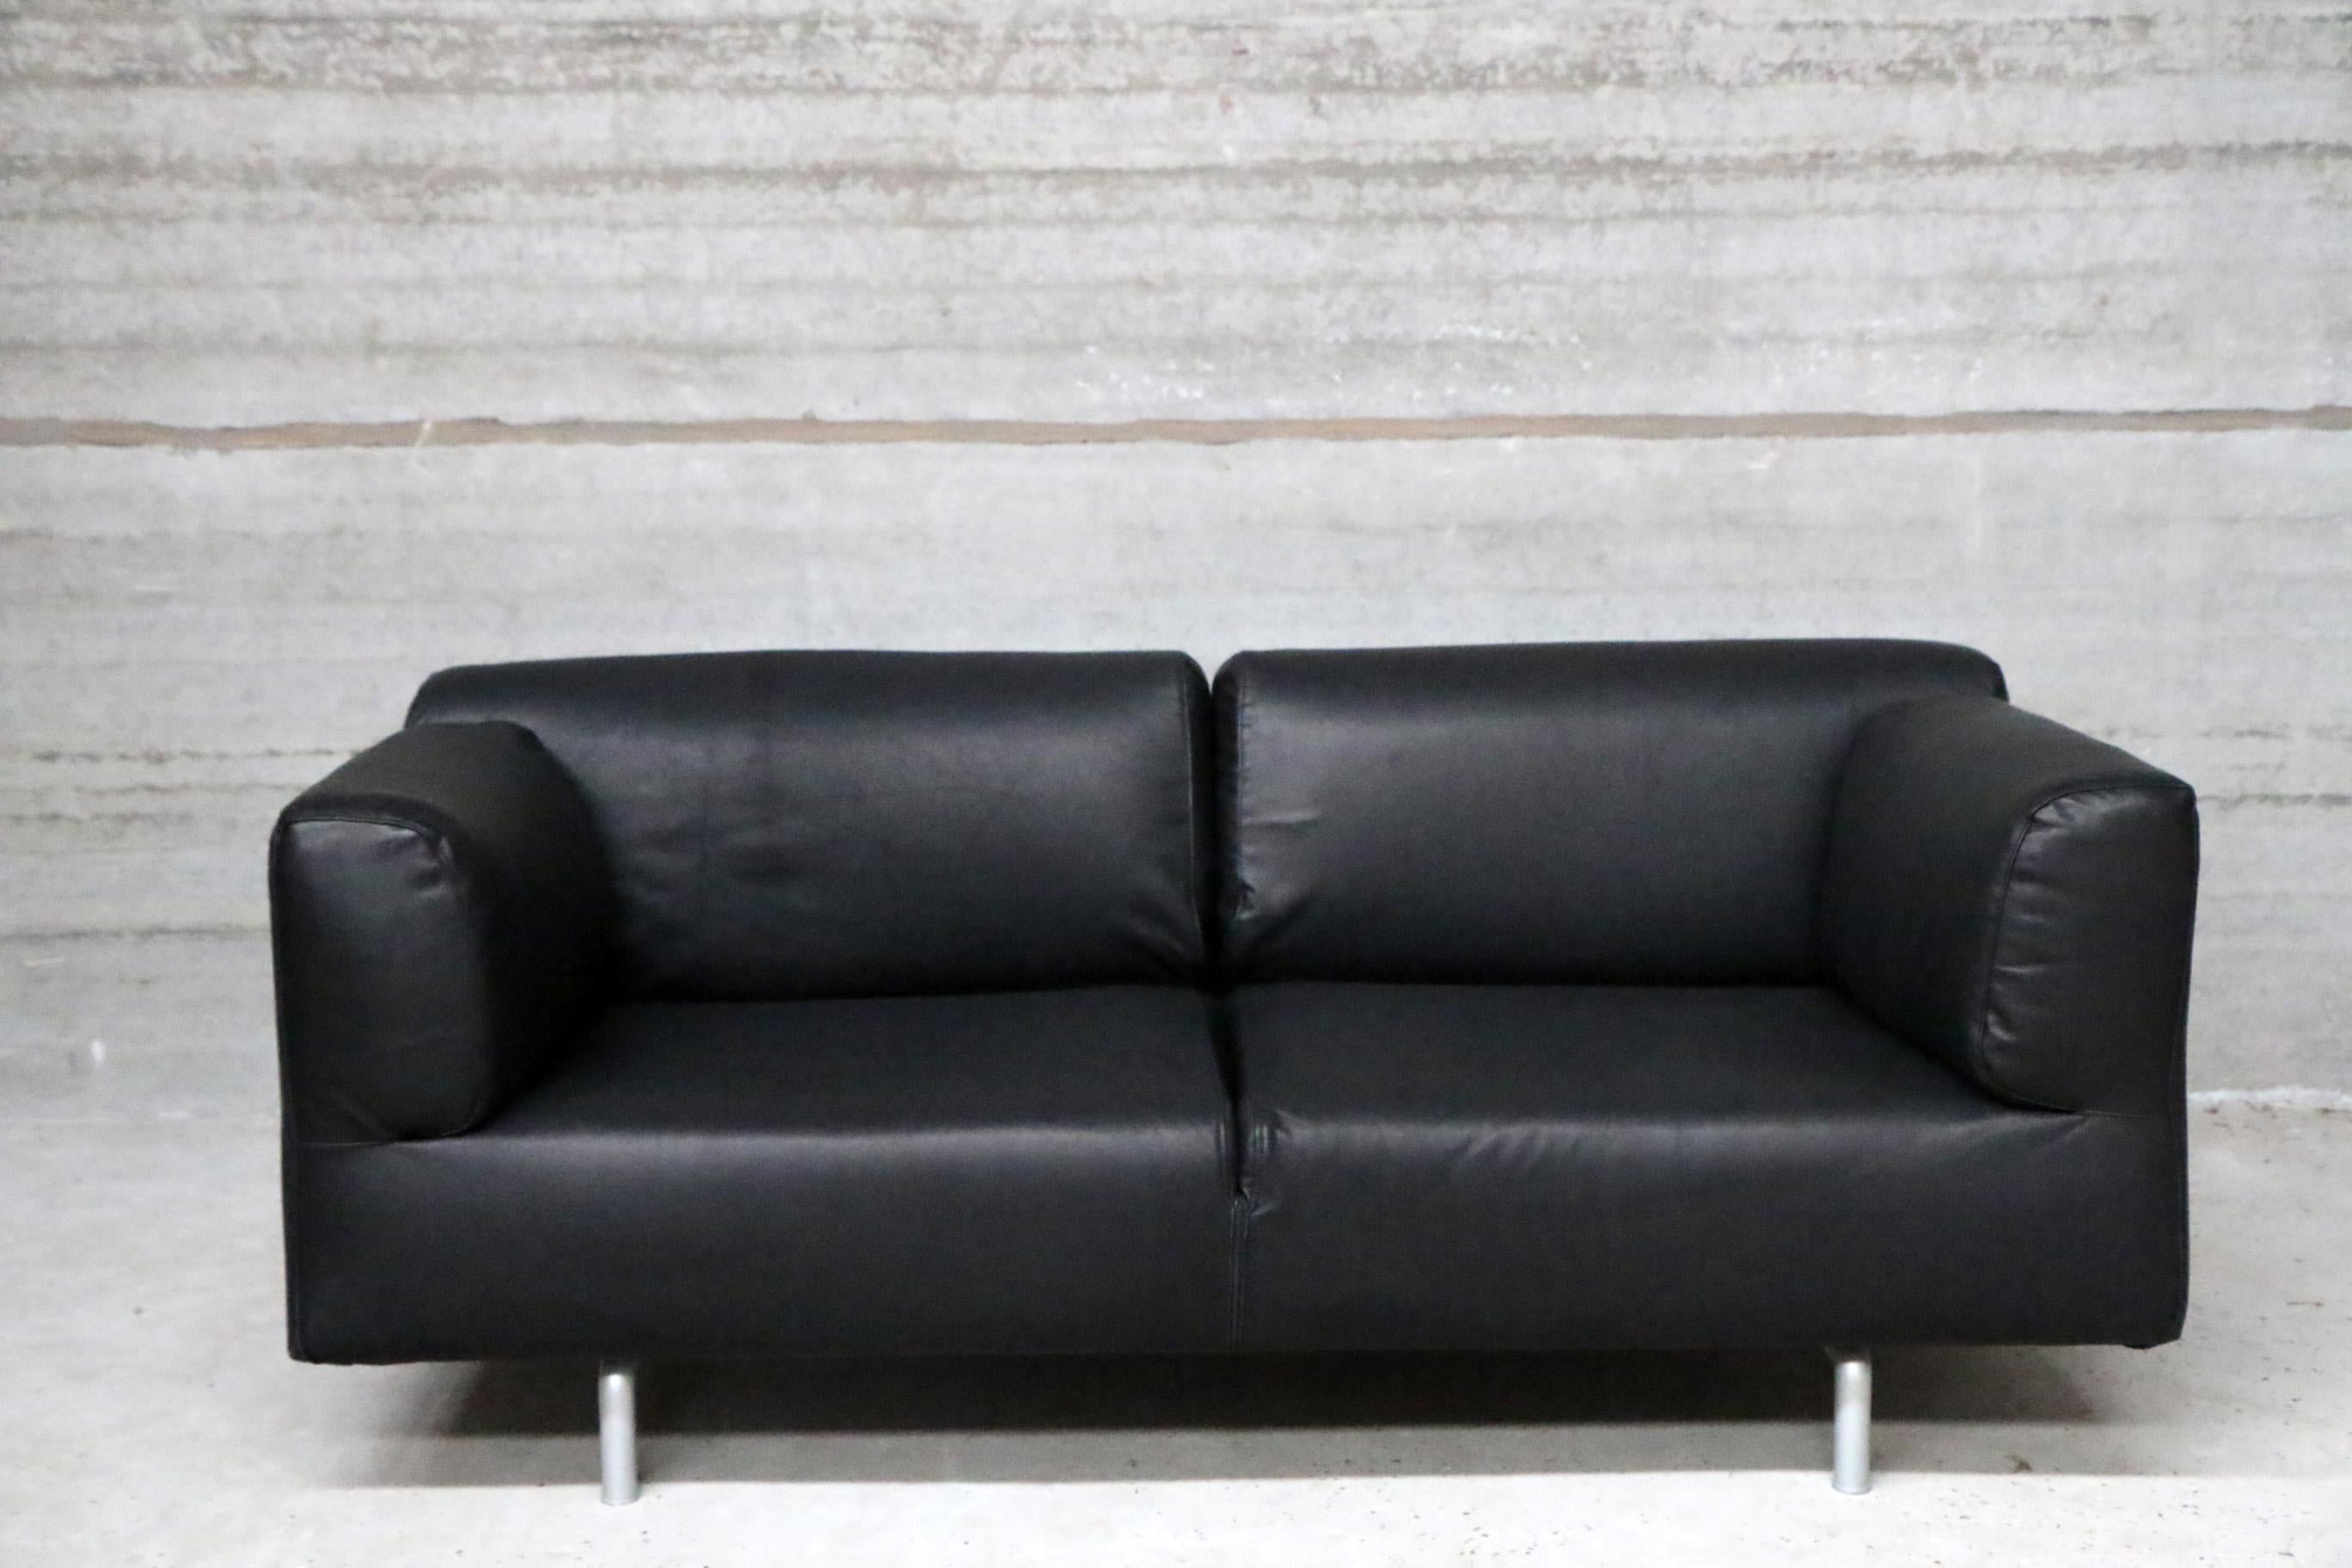 Re-upholstered in full grain black leather by funky vintage Belgium. Very elegant design and high seating comfort. Foam in excellent condition.